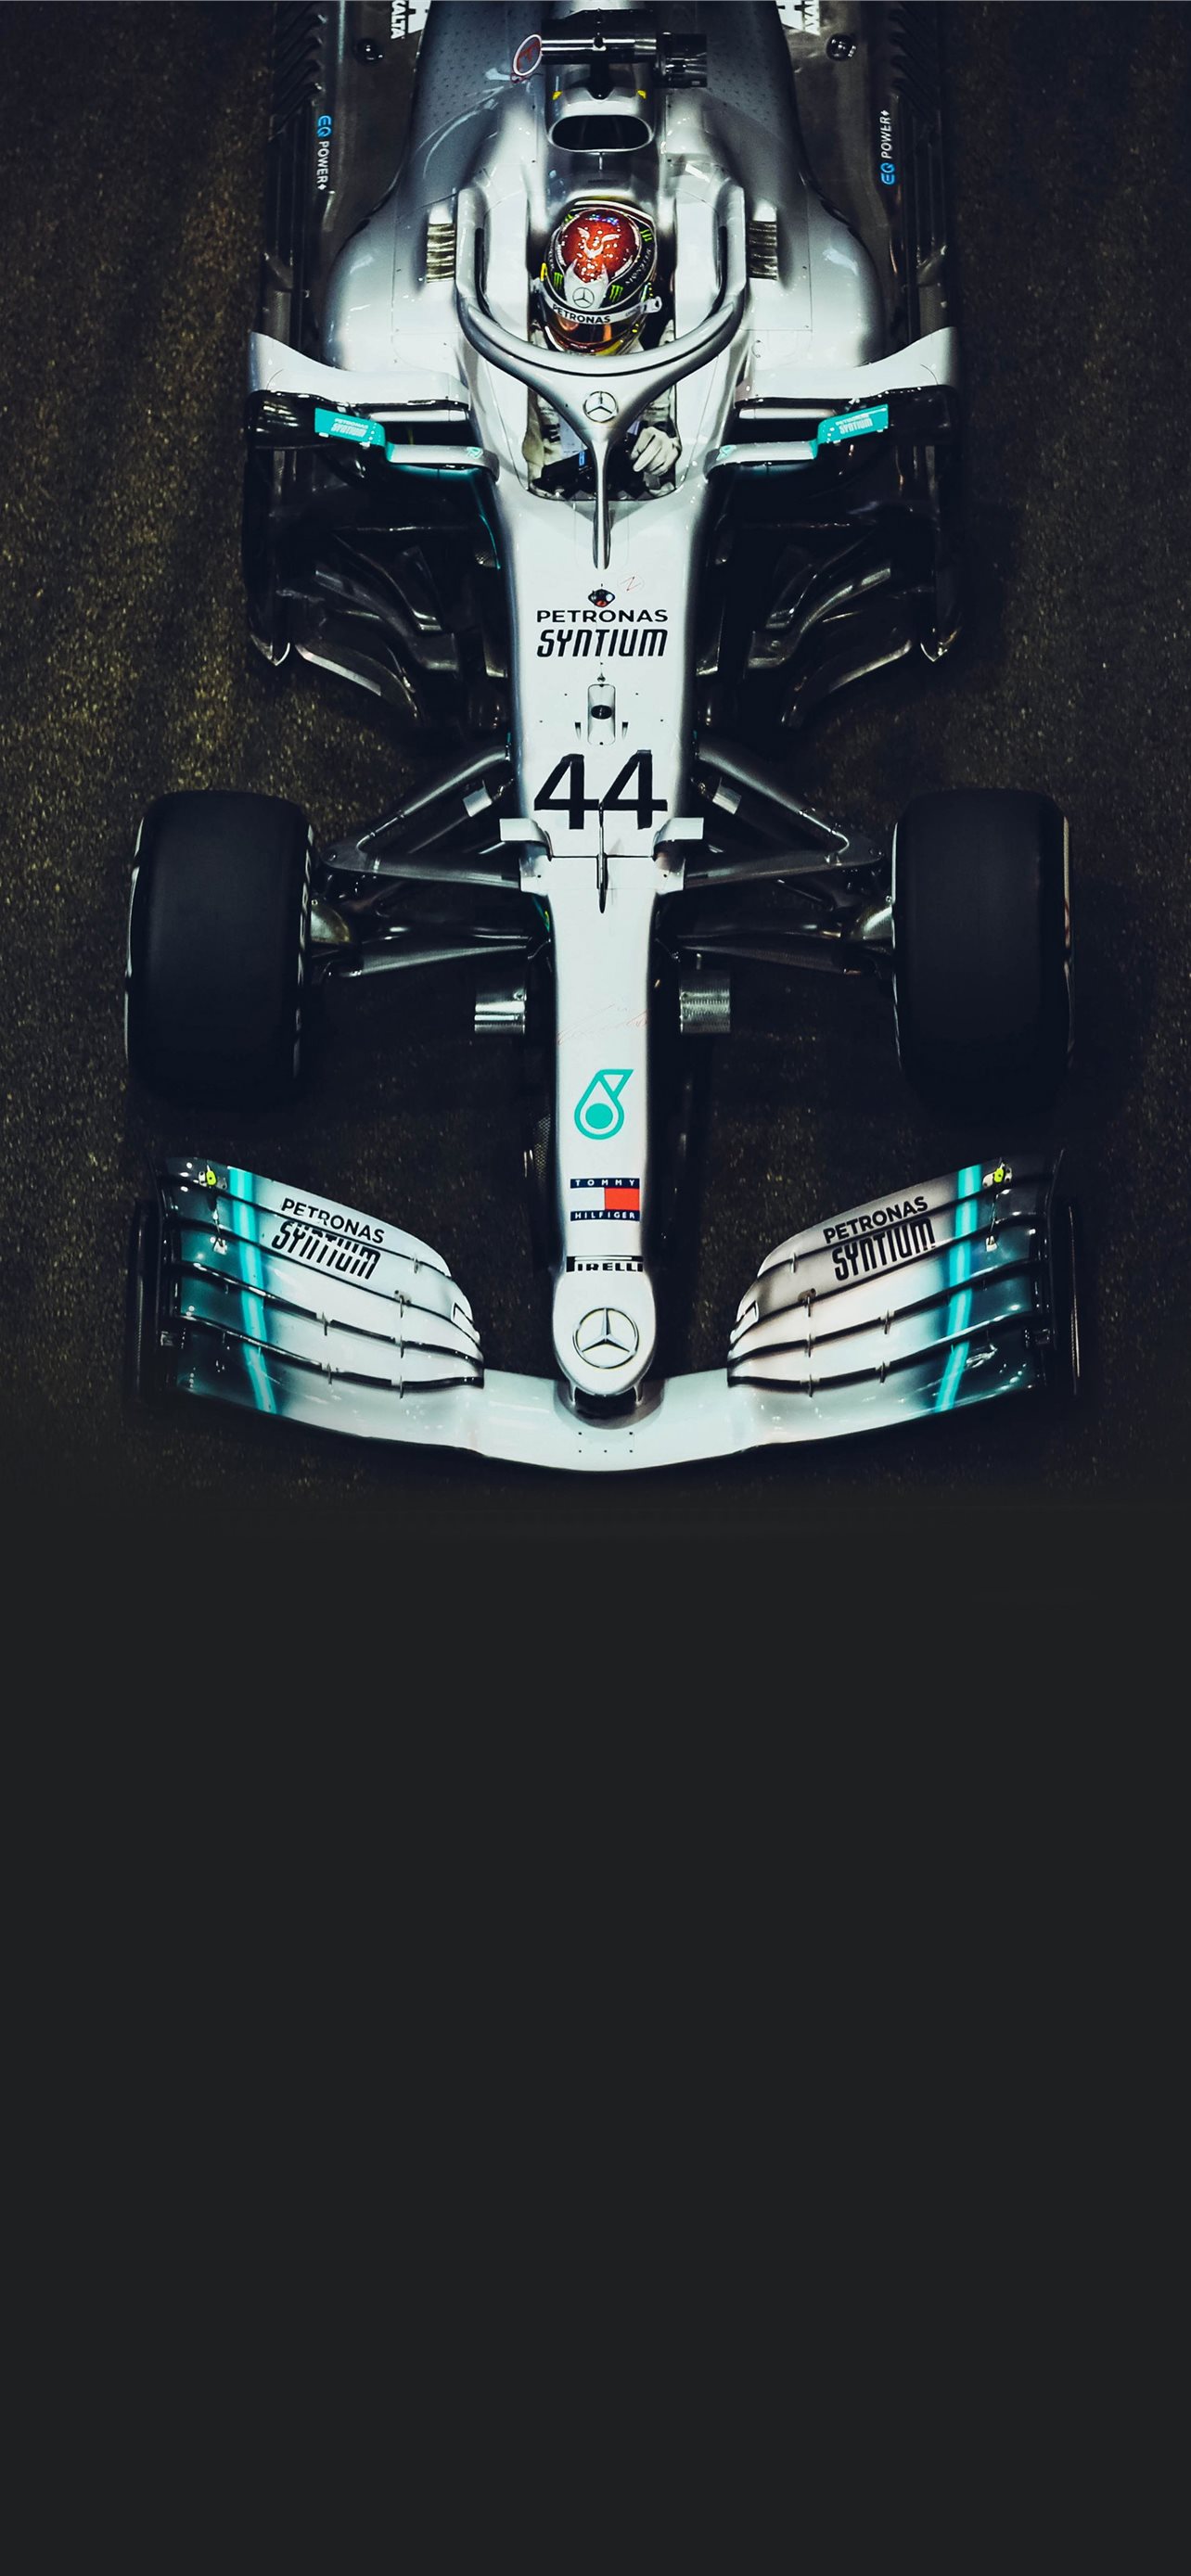 mercedes benz petronas iPhone Wallpapers Free Download